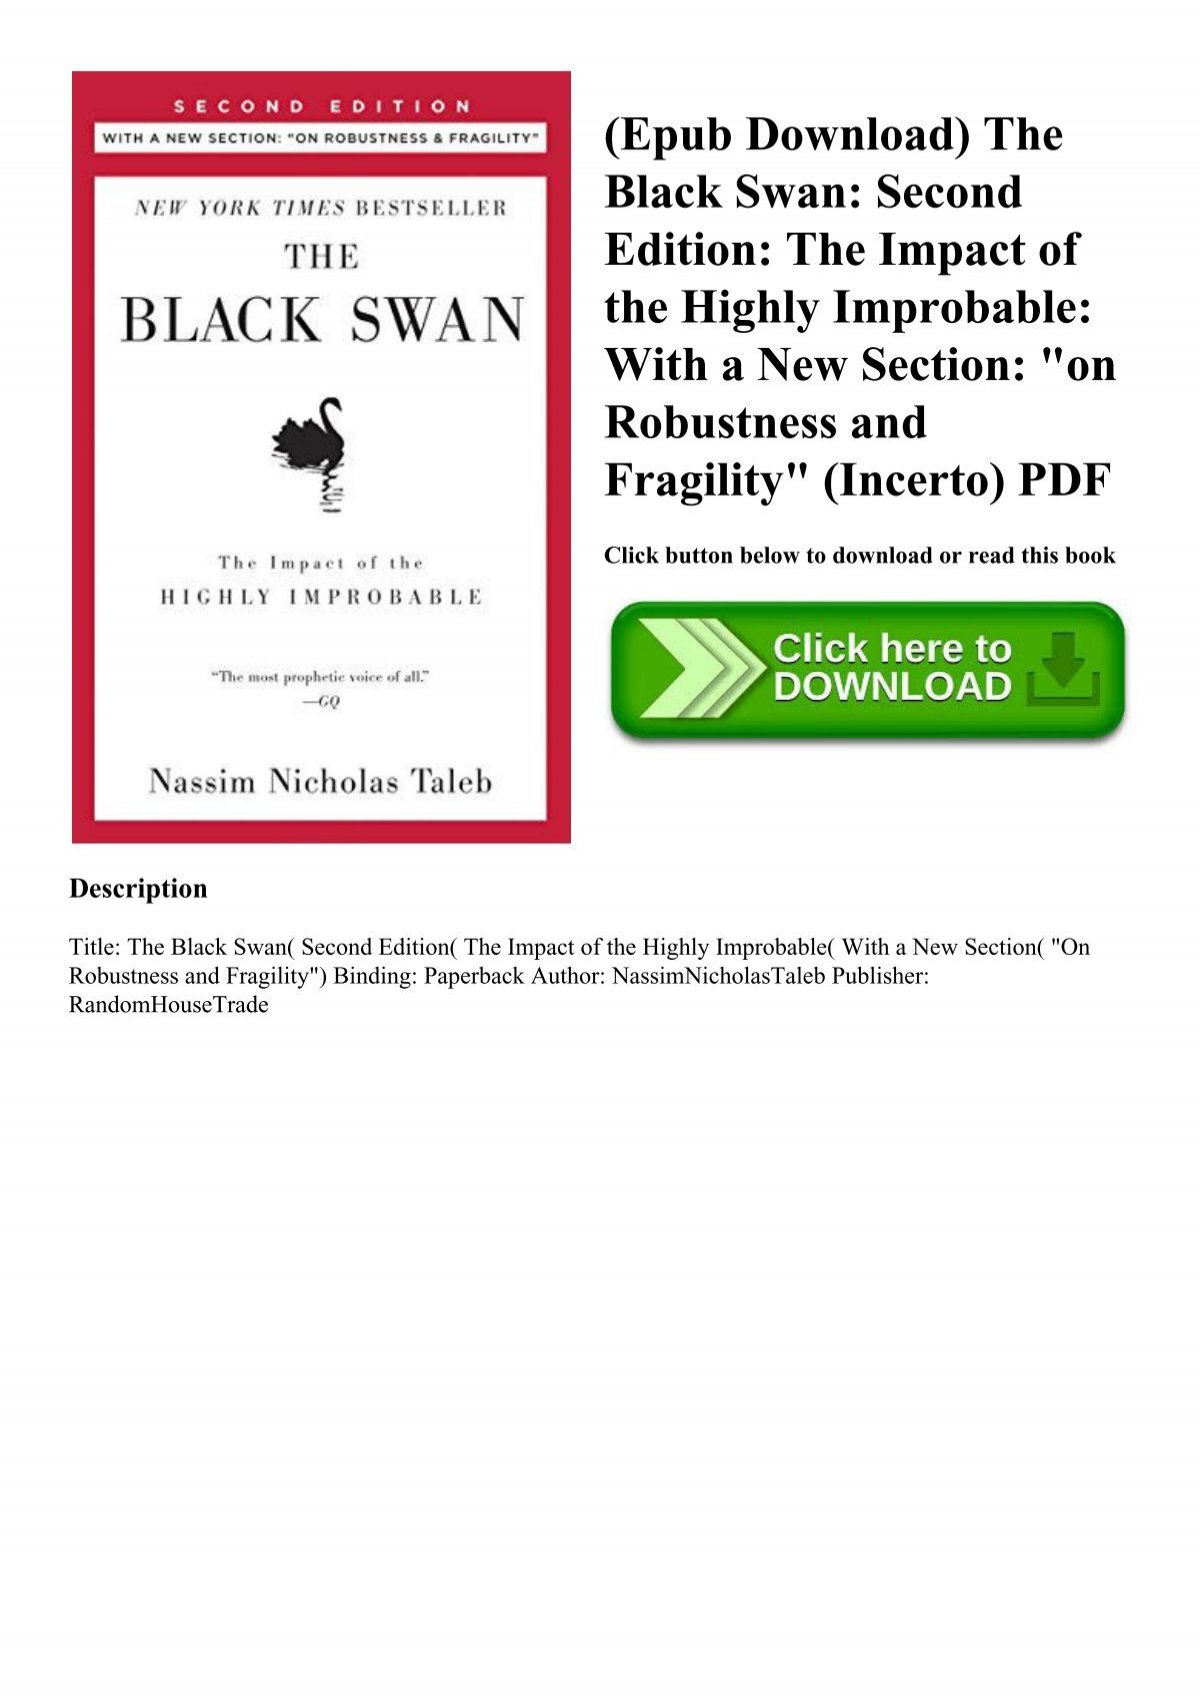 Epub Download) The Black Swan Second Edition of the Highly Improbable With a New on Robustness and Fragility (Incerto)